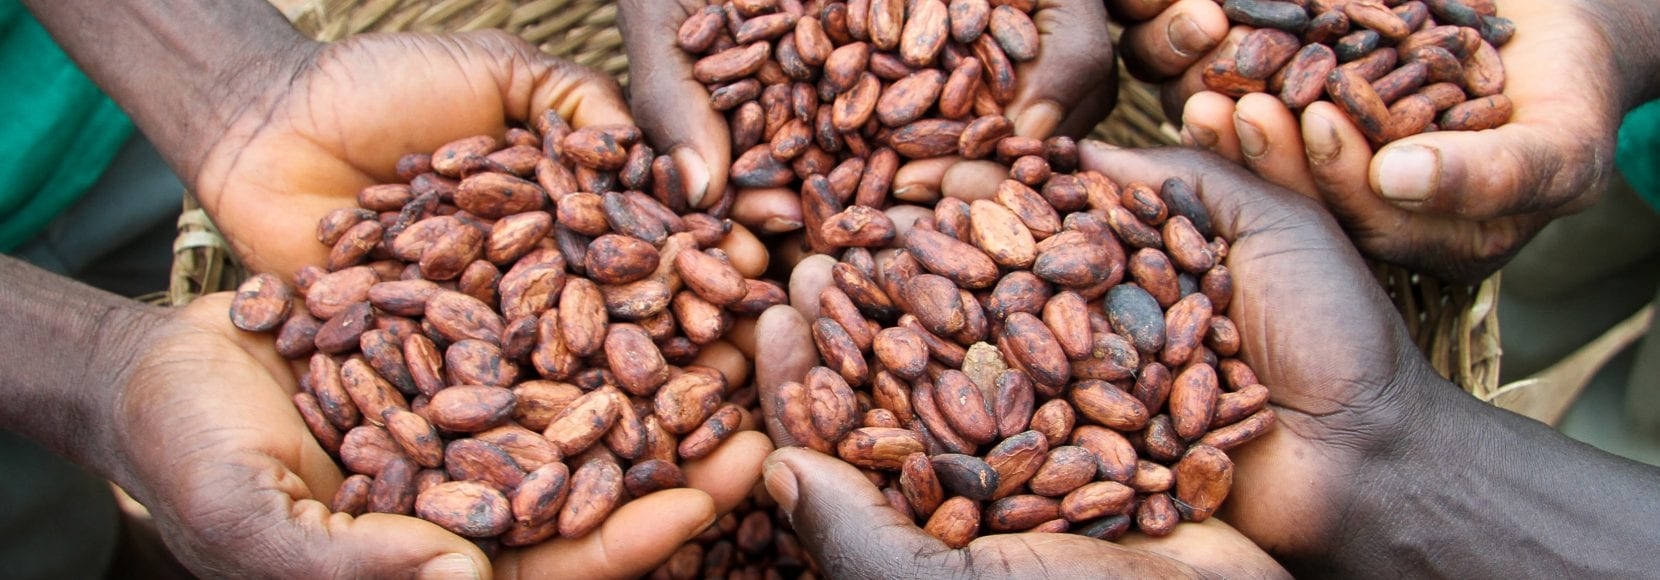 Corporate Sustainability Page Hero Image: Cocoa farmers holding dried cocoa beans in Ghana